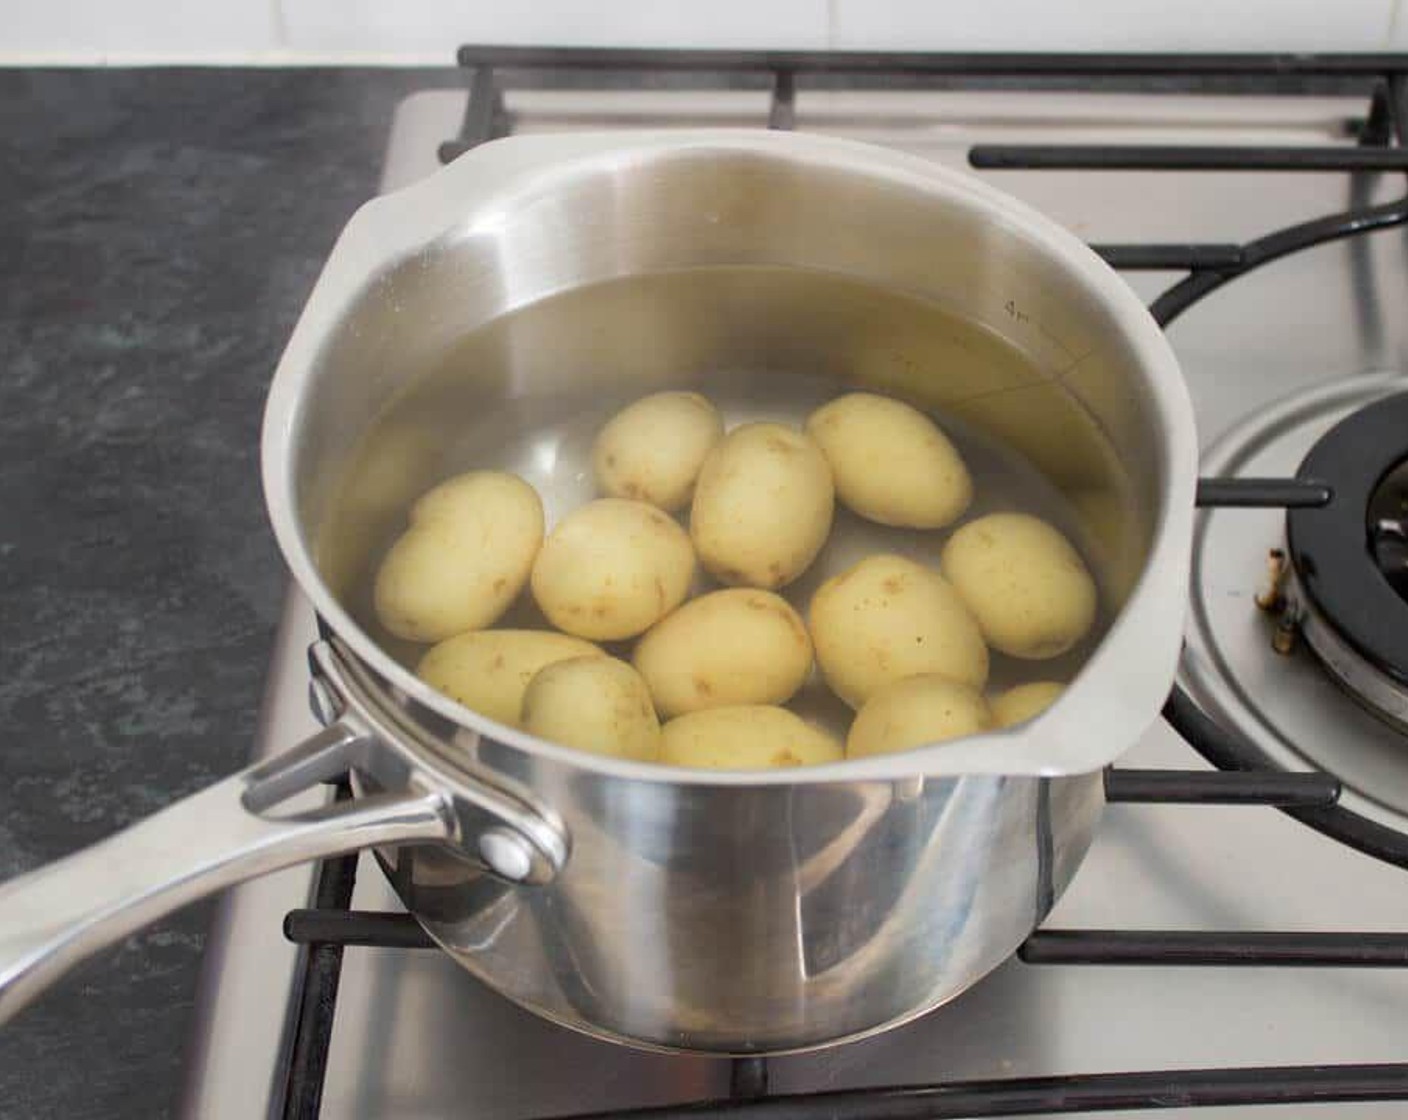 step 1 Bring a large pan of generously salted water to the boil. Add in the Baby Potatoes (16 oz) being careful not to splash yourself. Bring back up to the boil then cook for 15 minutes until starting to soften.